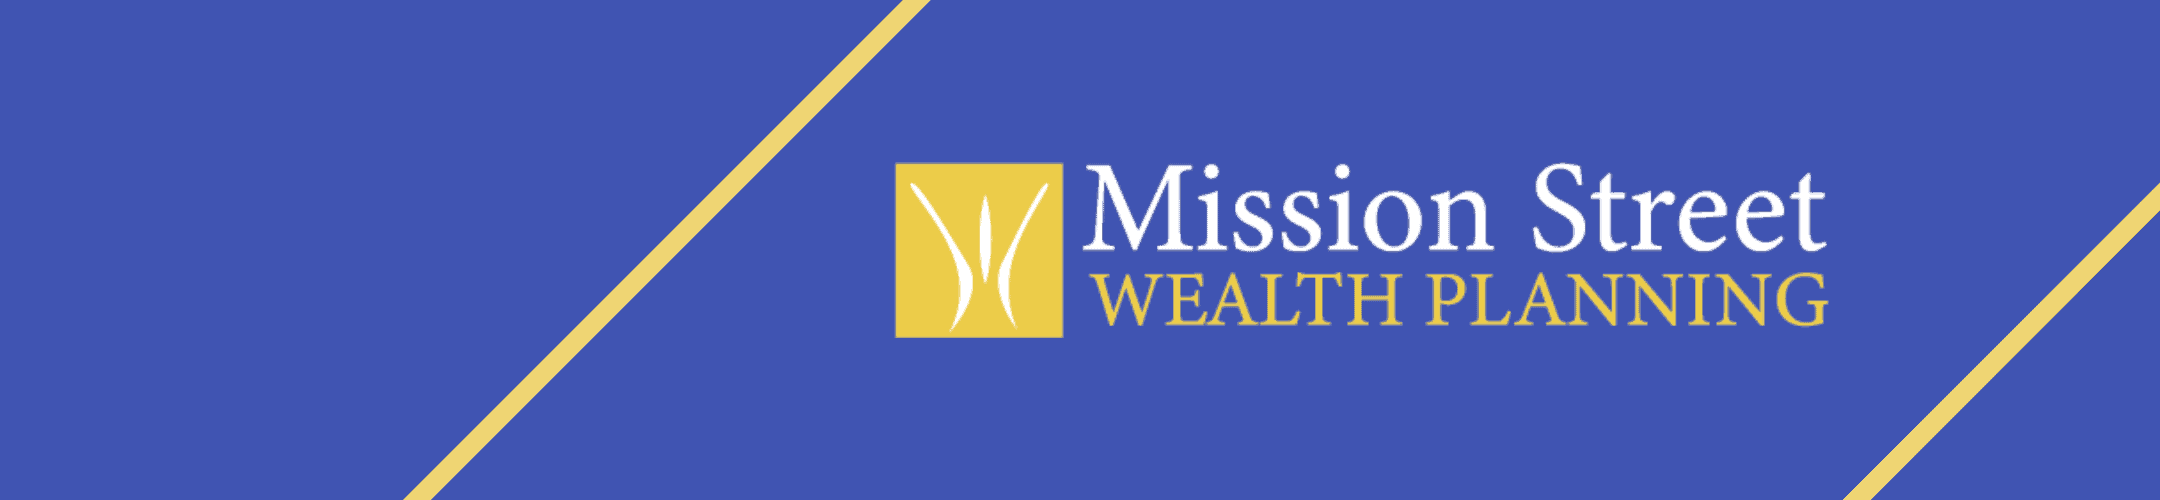 Logo of mission street wealth planning on a royal blue background with an elegant yellow 'm' design, emphasizing financial sophistication and strategic wealth management.